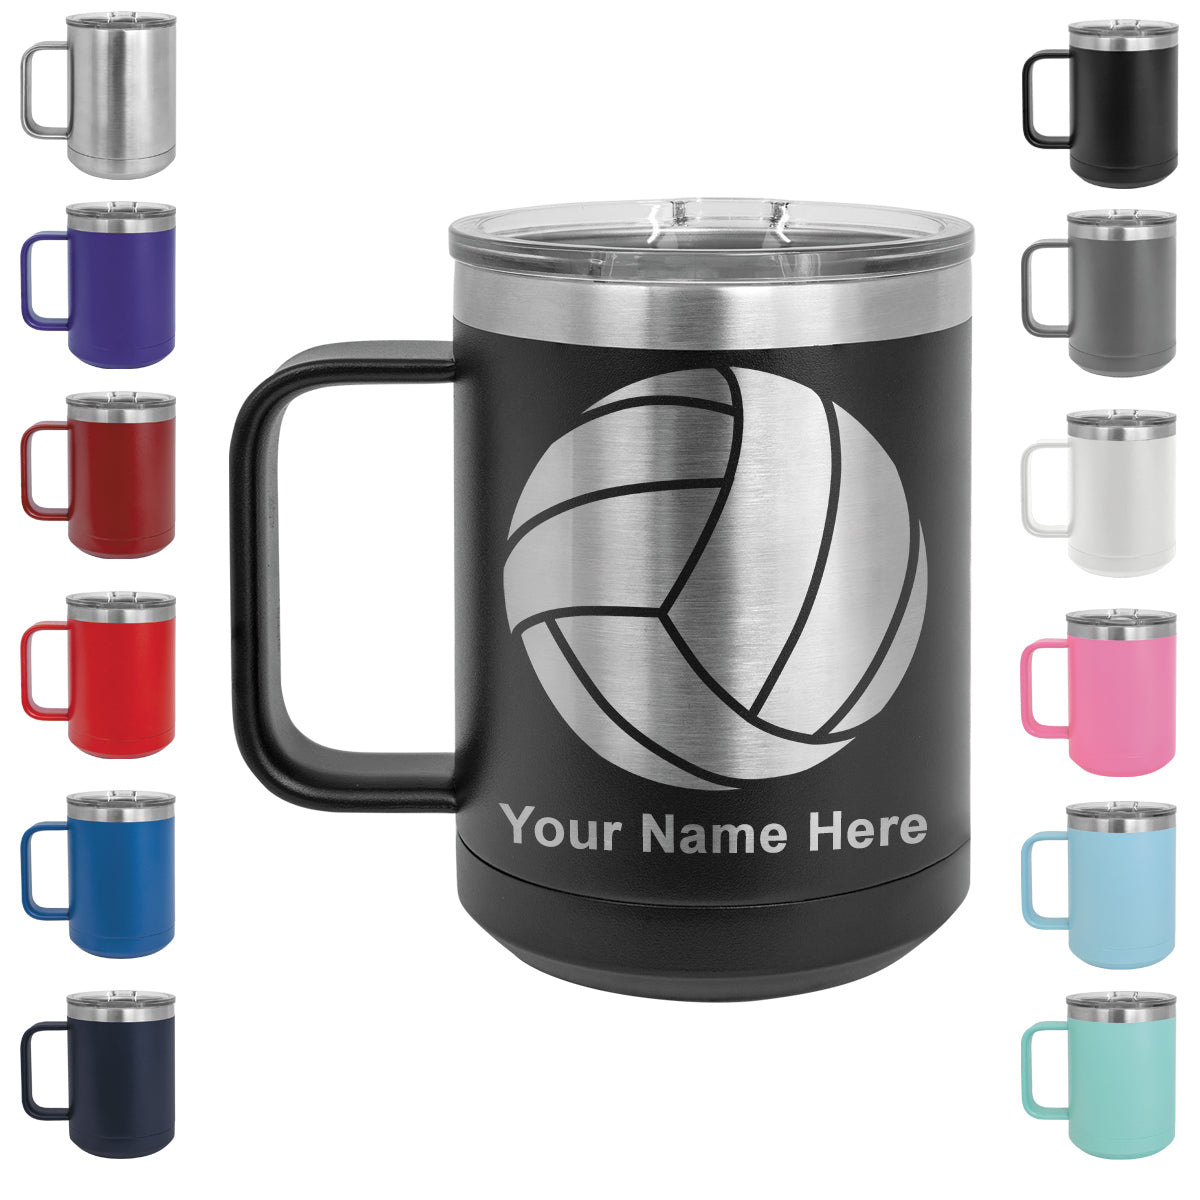 15oz Vacuum Insulated Coffee Mug, Volleyball Ball, Personalized Engraving Included